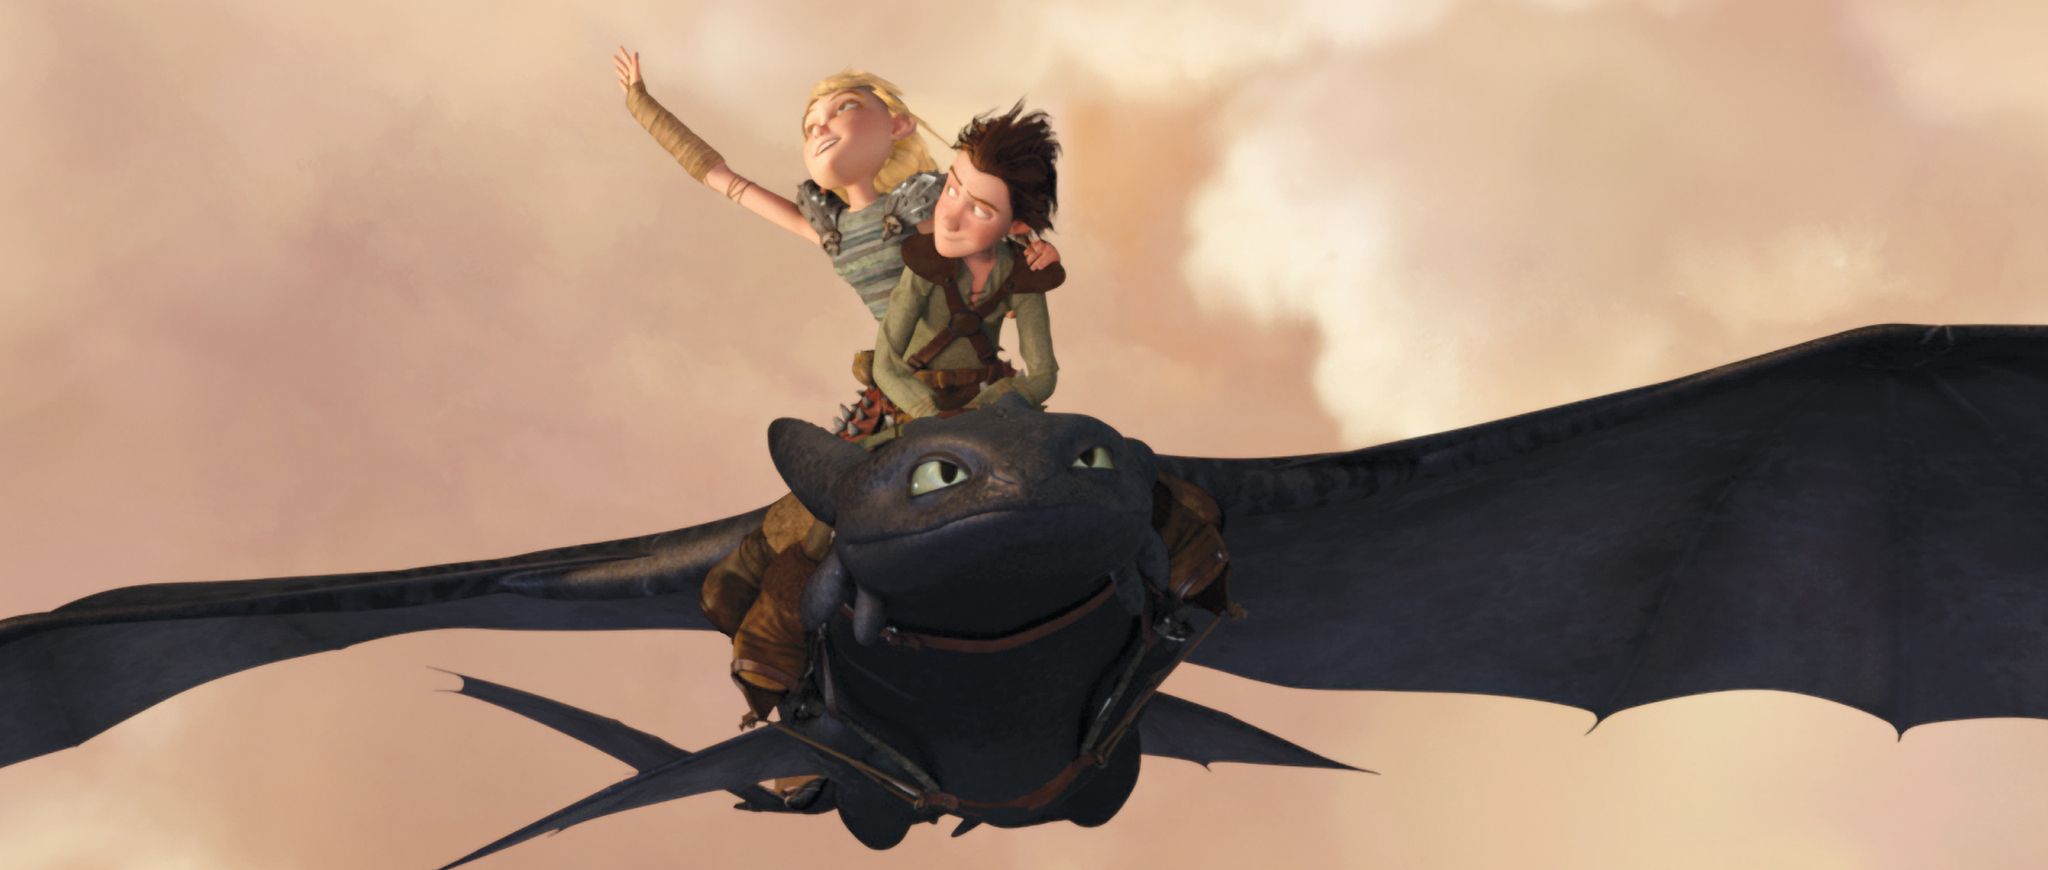 Jay Baruchel and America Ferrera in How to Train Your Dragon (2010)